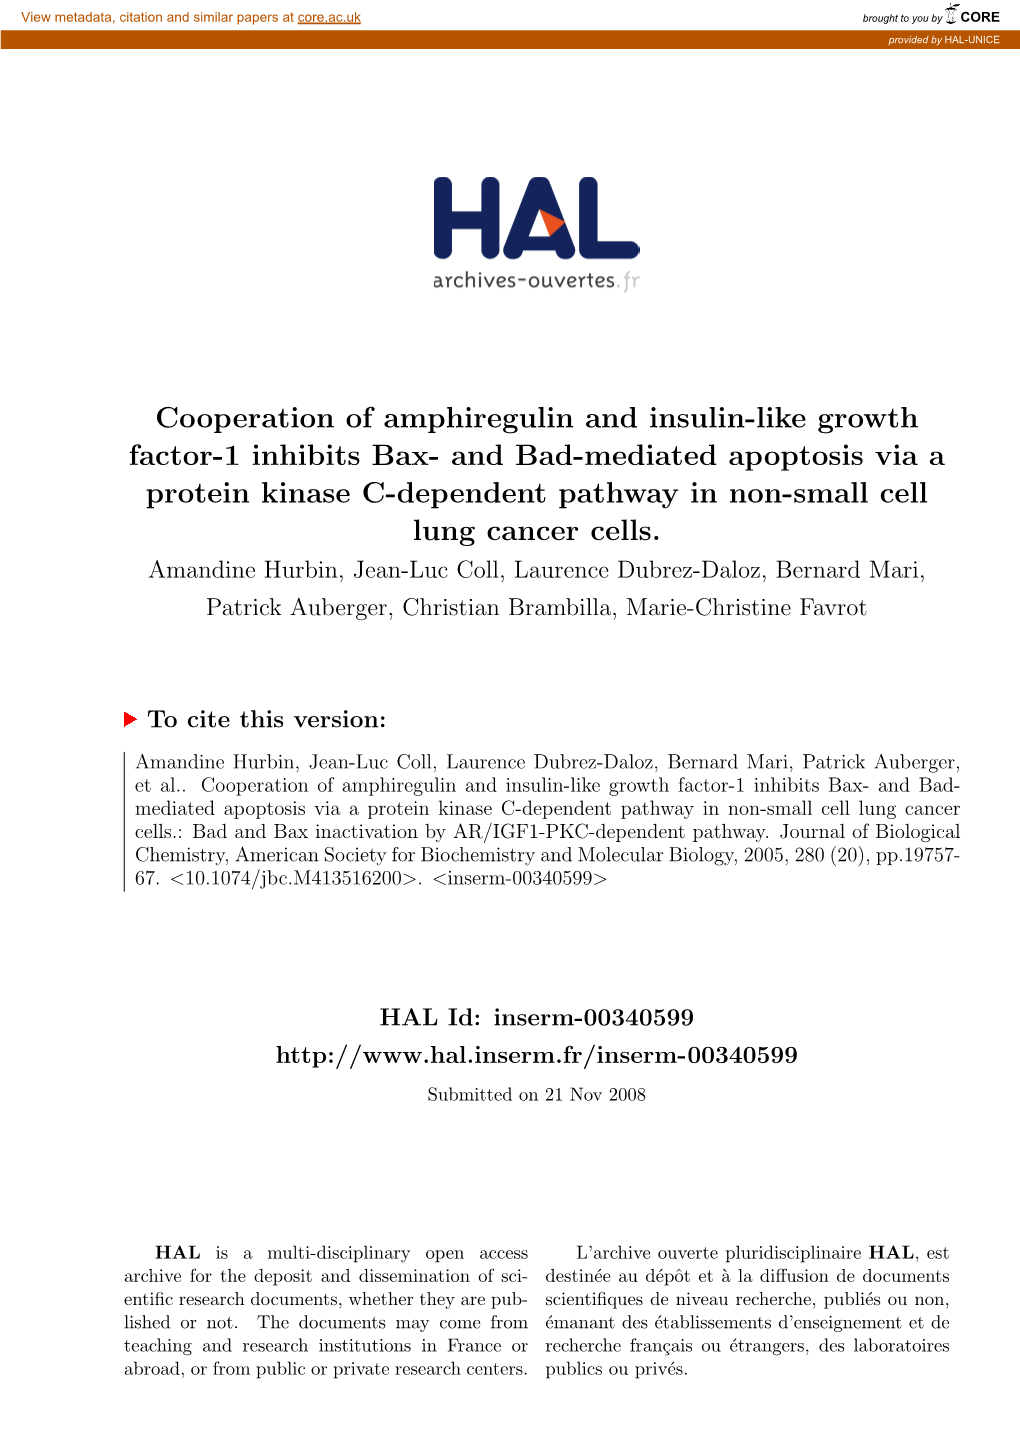 Cooperation of Amphiregulin and Insulin-Like Growth Factor-1 Inhibits